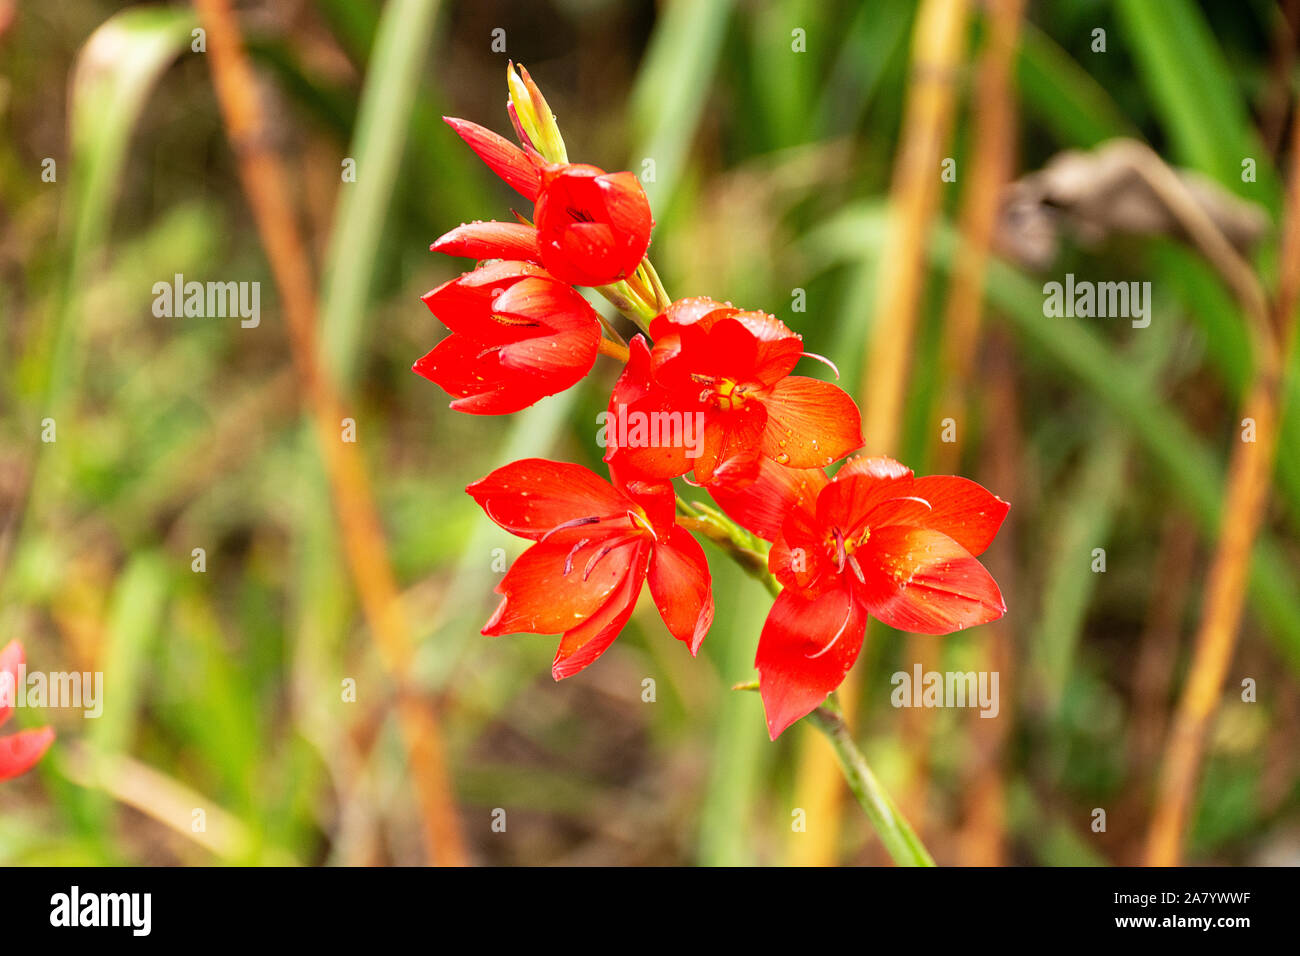 South african gladiolus, "gladiolus carmineus". Branch of red flowers with drops of water. Stock Photo